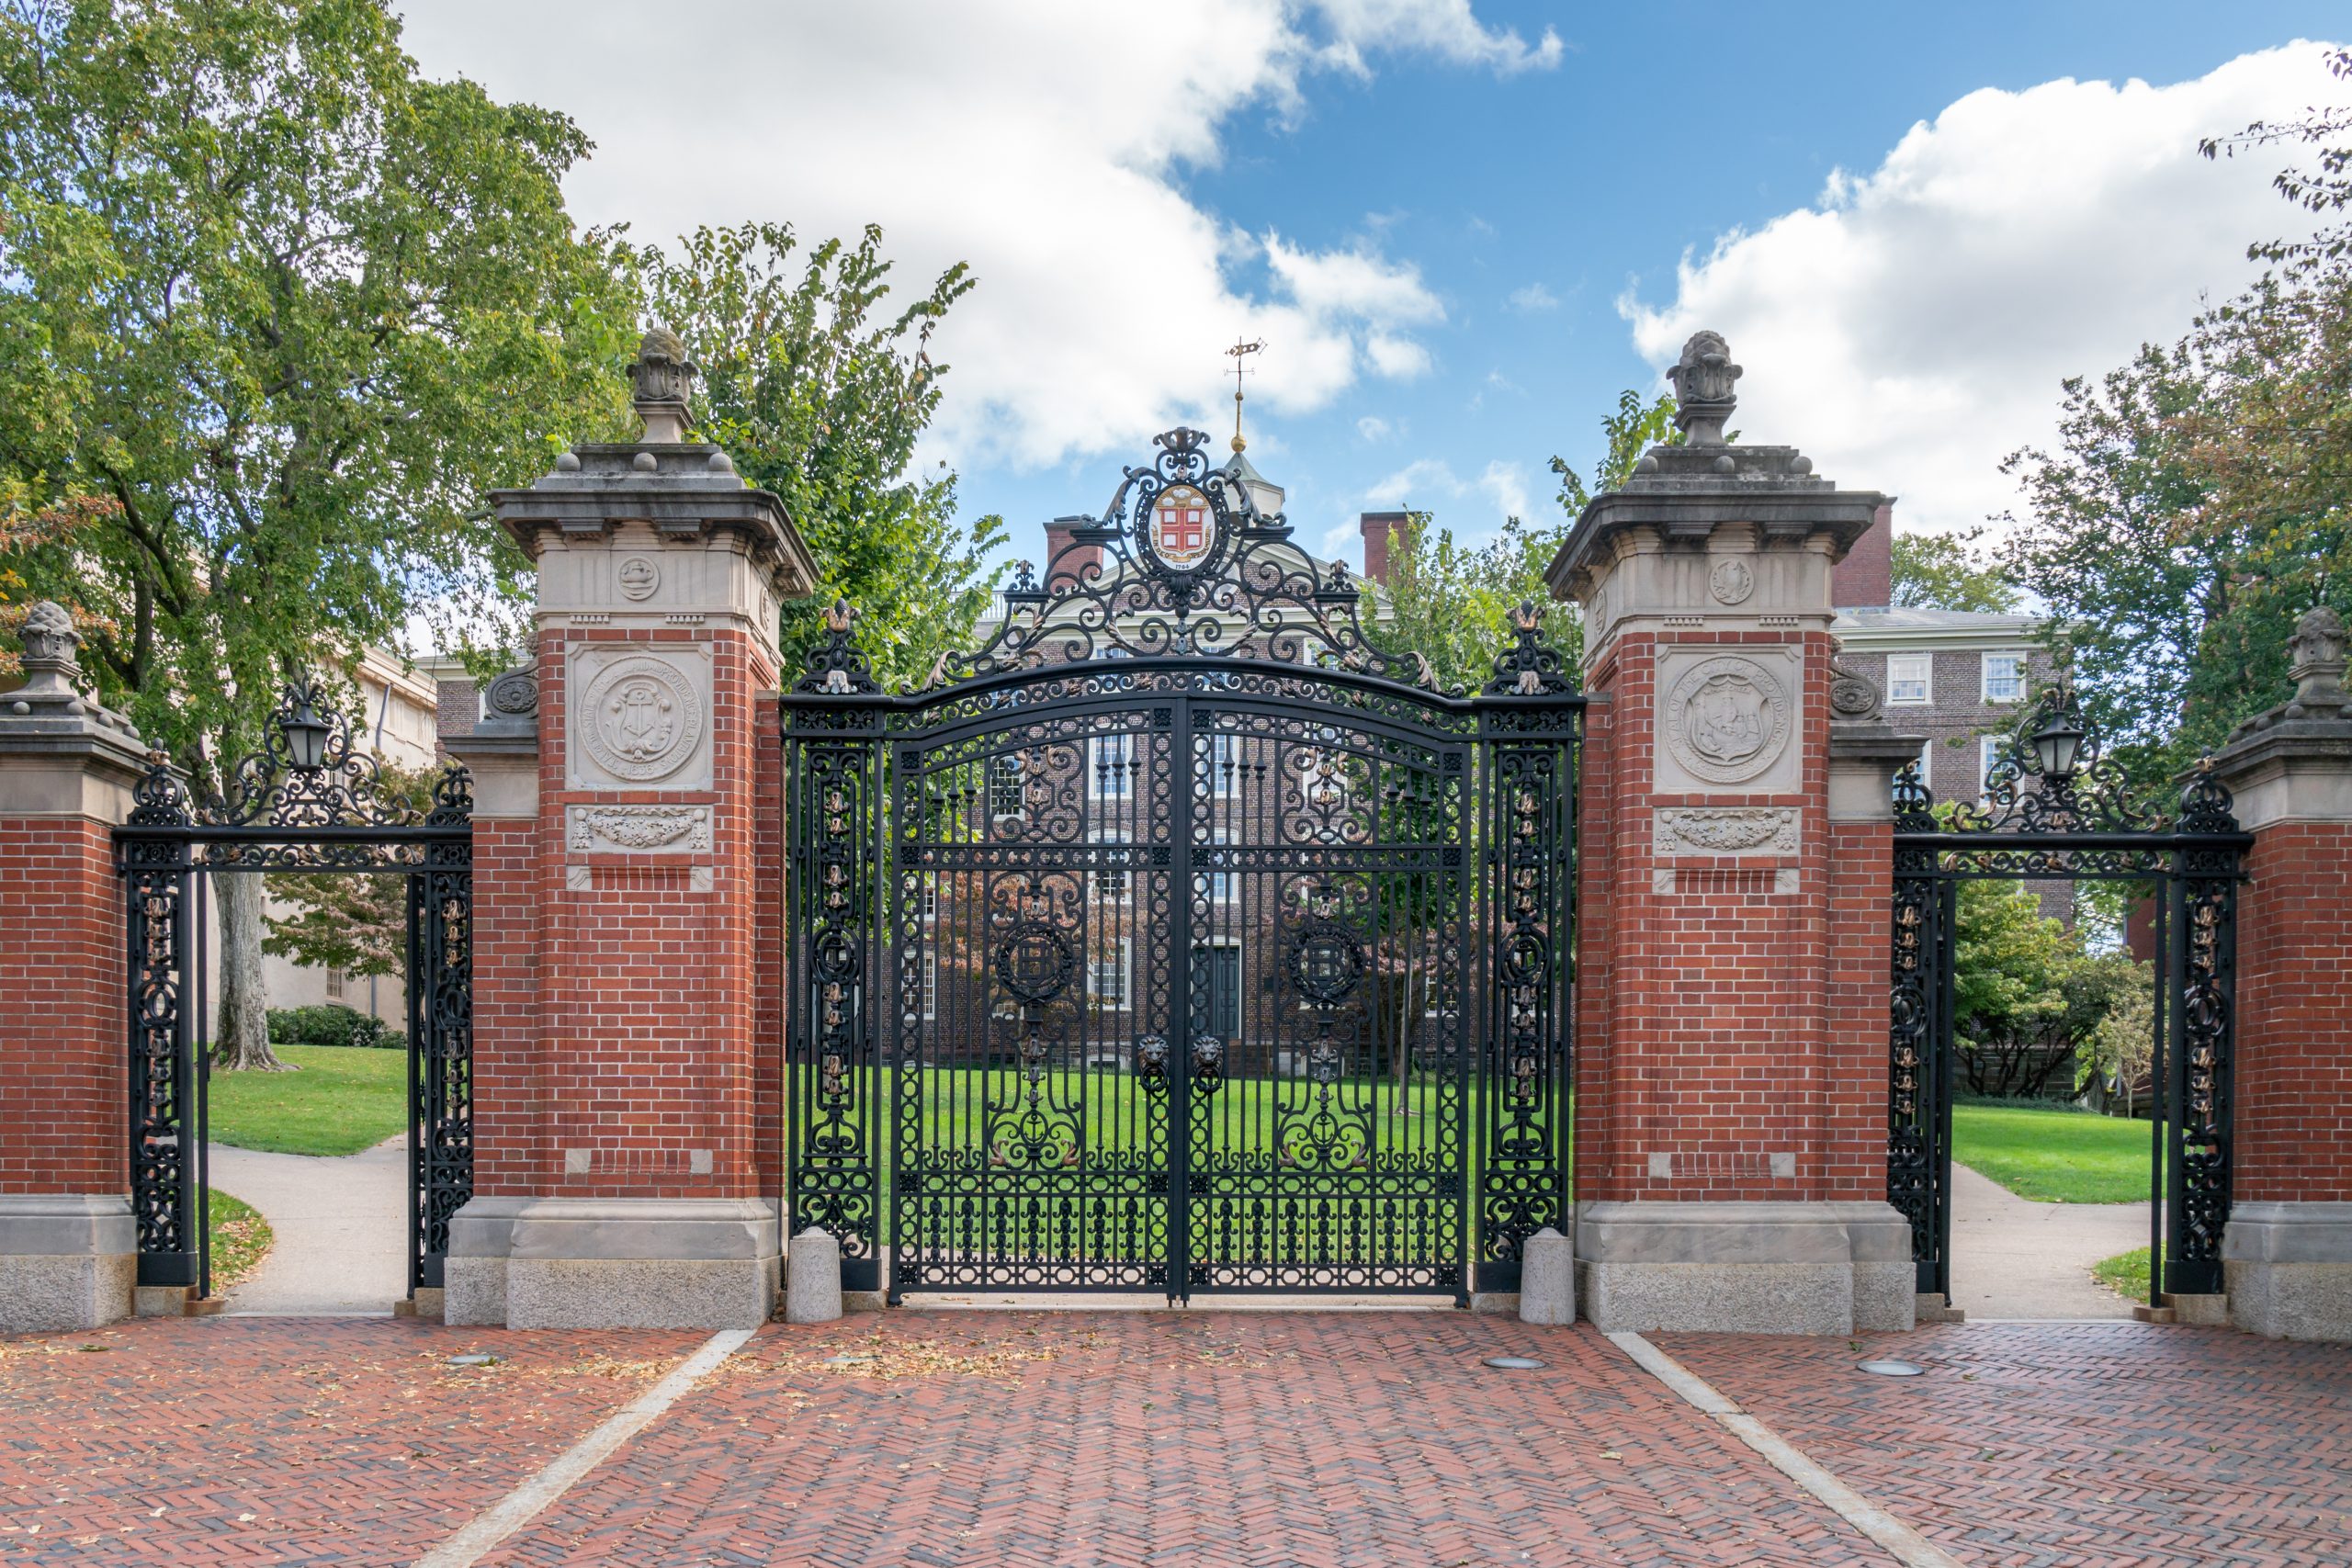 How Difficult Is It to Get Into an Ivy League School?